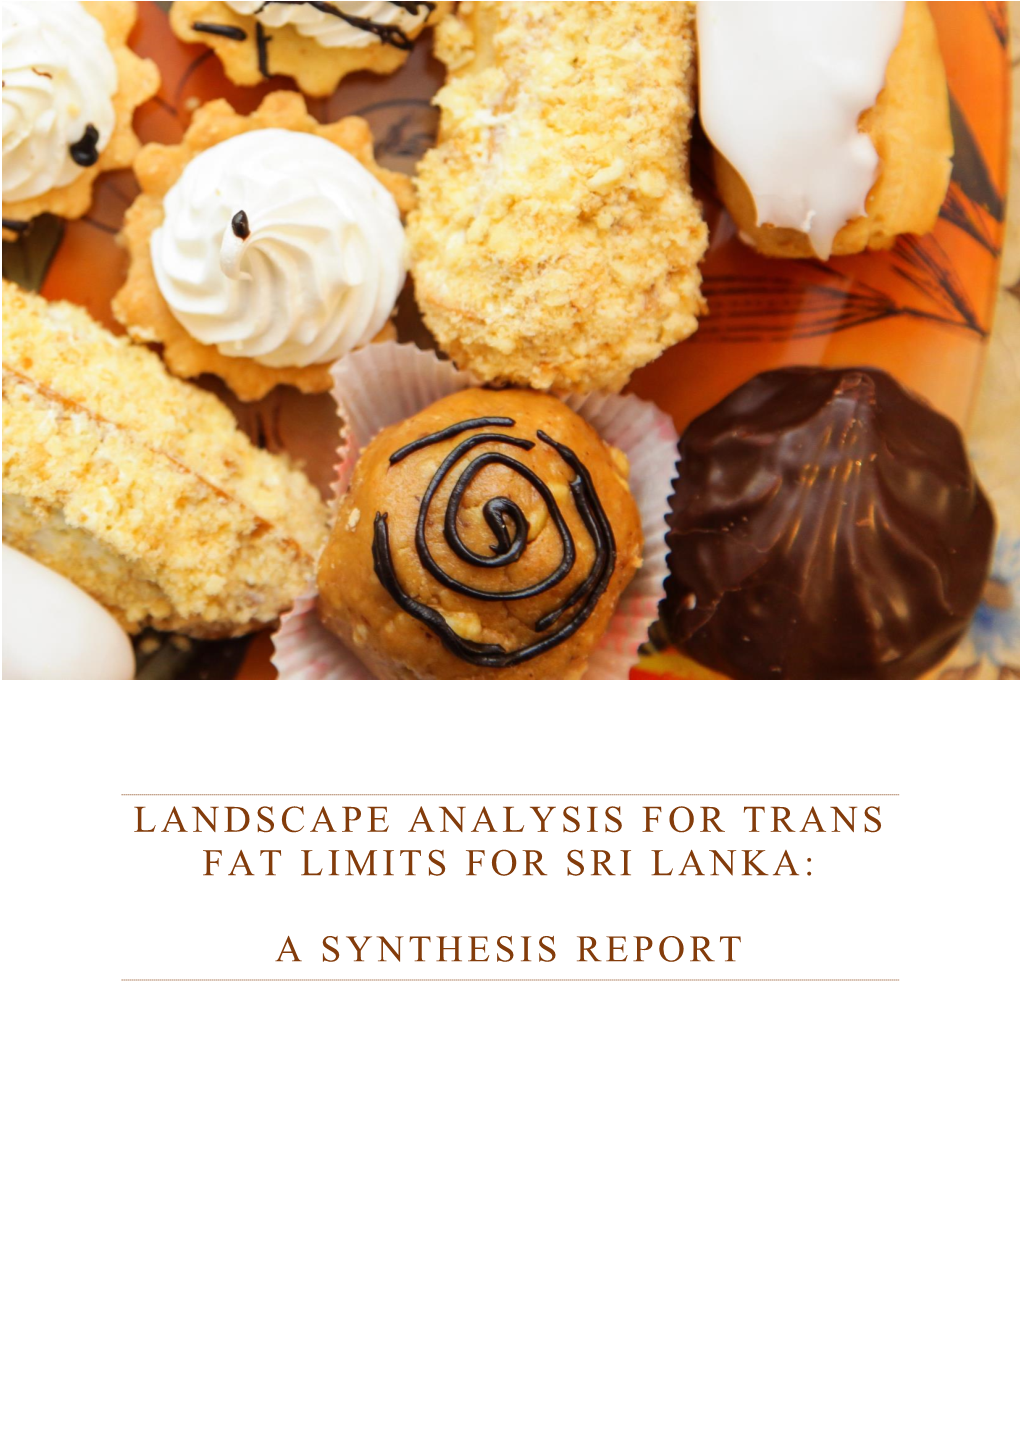 Landscape Analysis for Trans Fat Limits for Sri Lanka: a Synthesis Report ISBN: 978-92-9022-816-5 © World Health Organization 2020 Some Rights Reserved